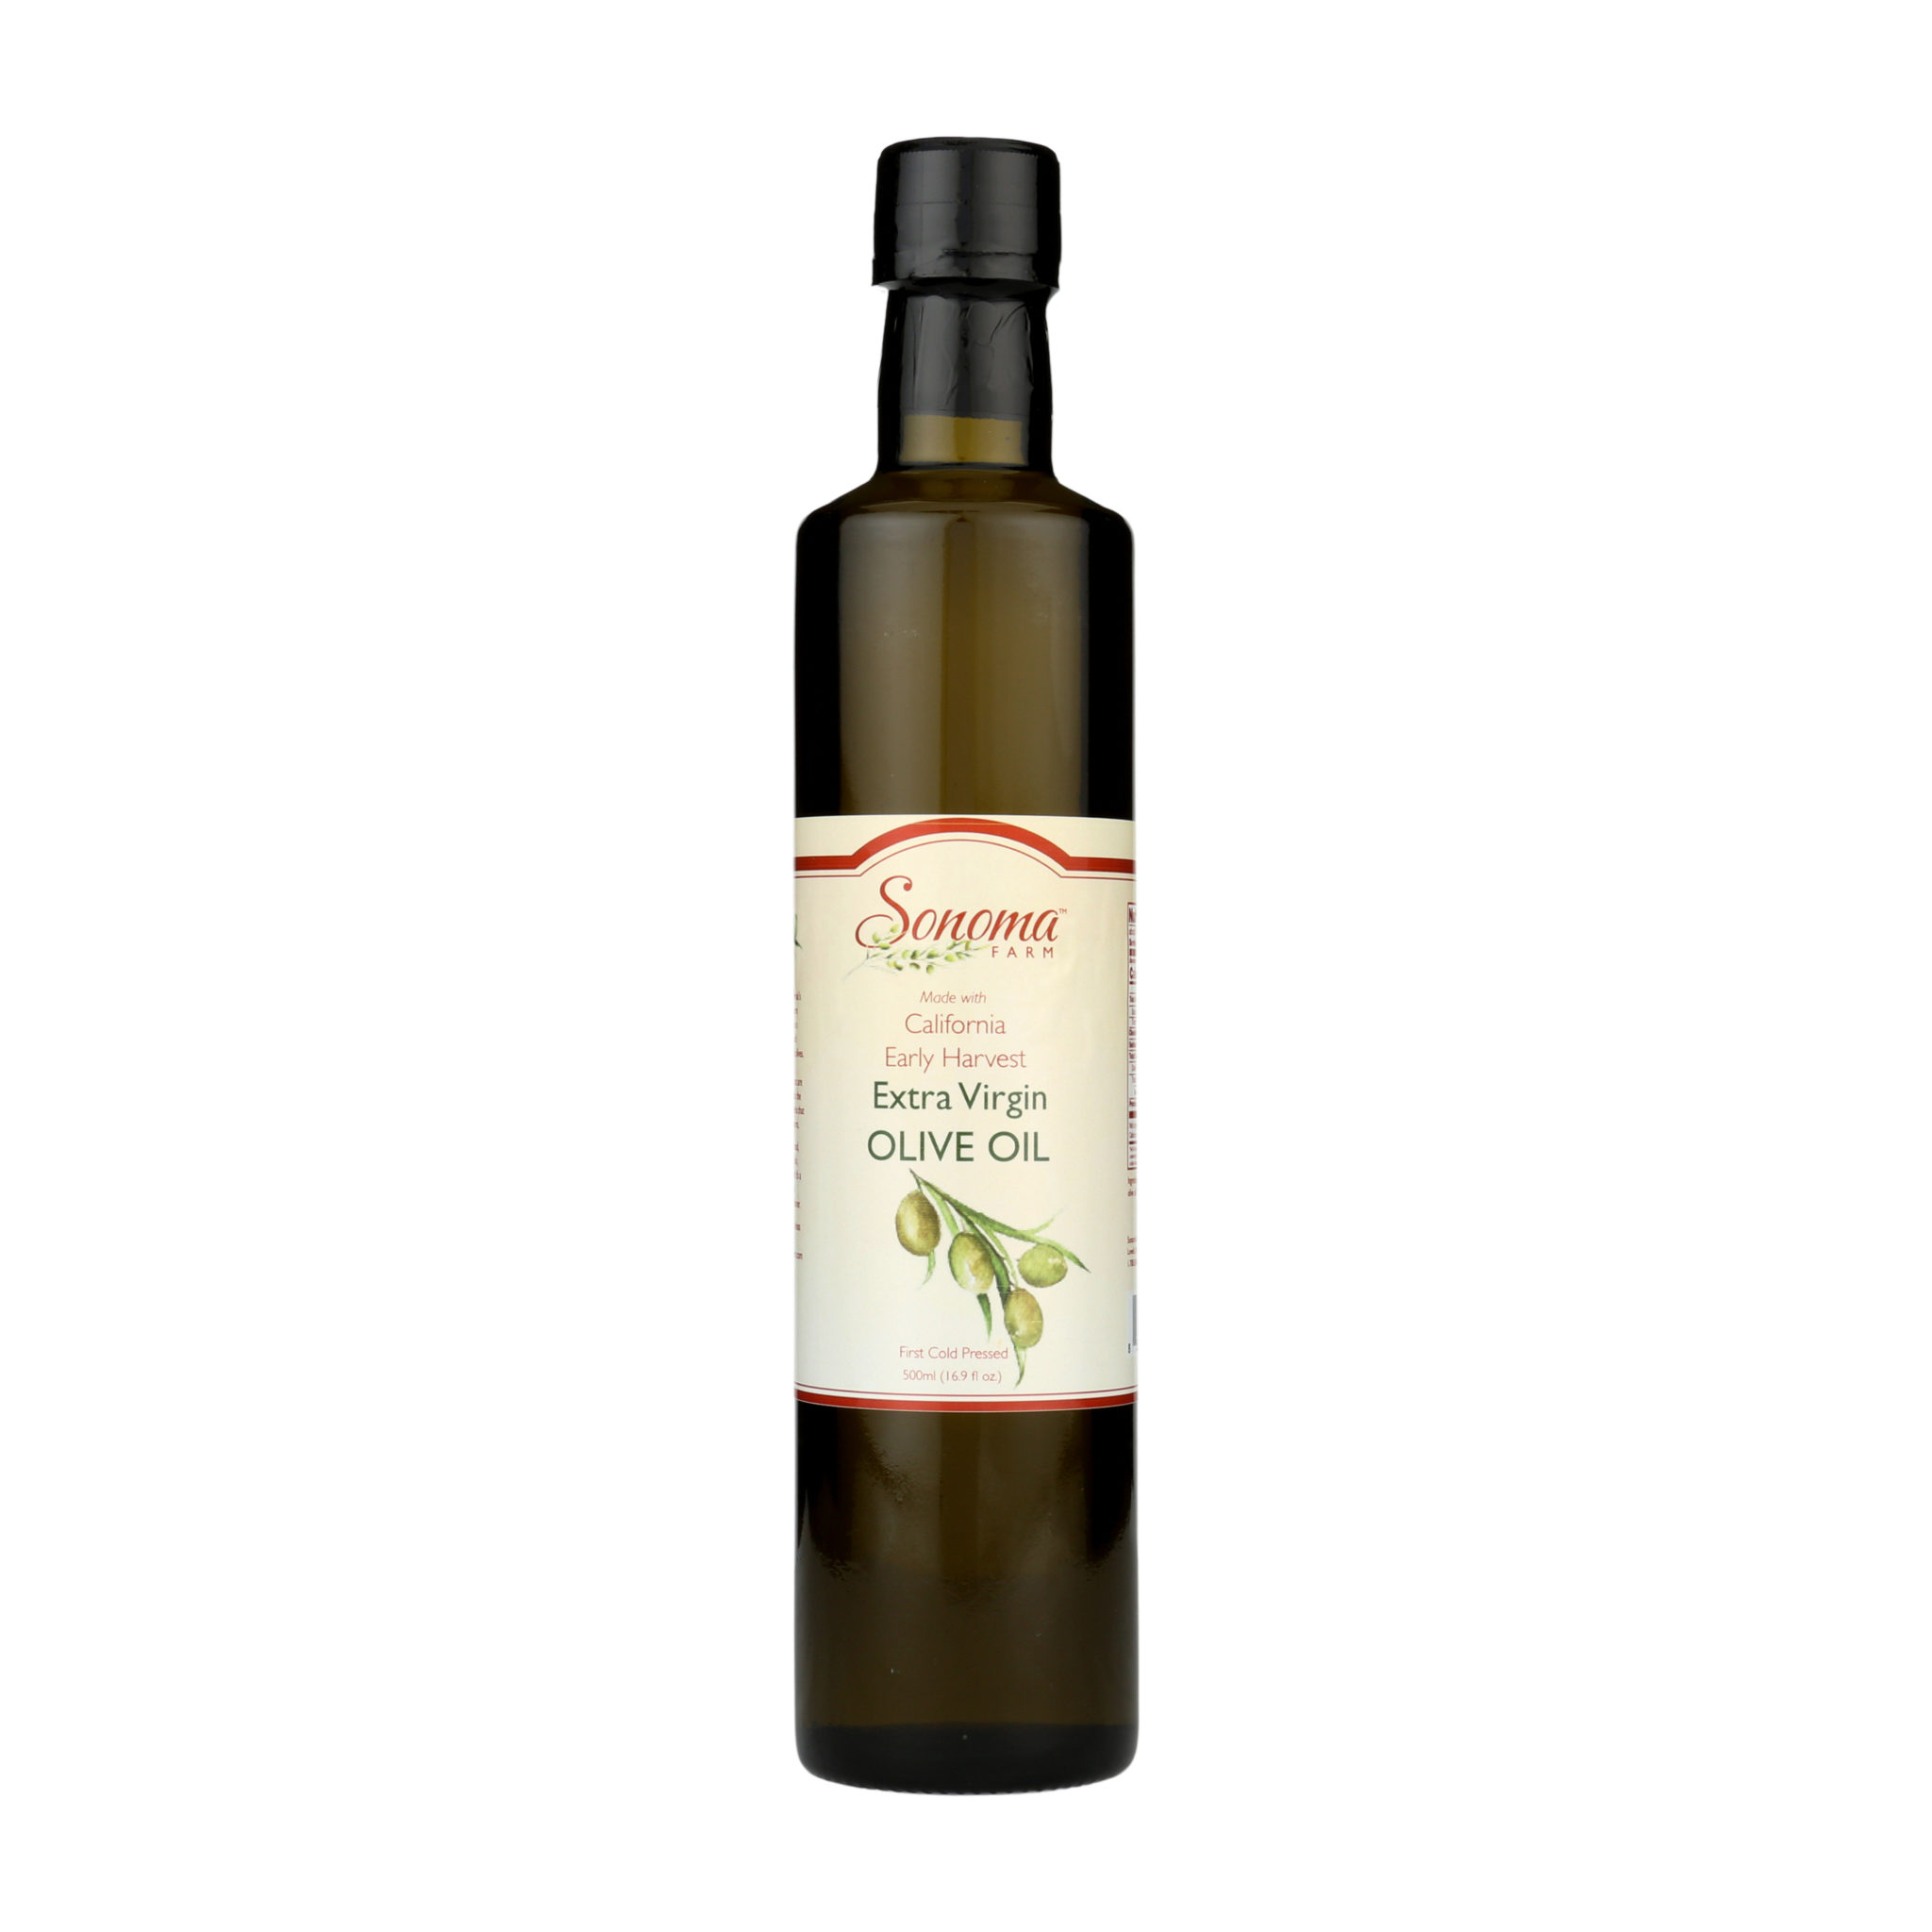 Buy Organic Extra Virgin Olive Oil Online, 55 Gallon Drums